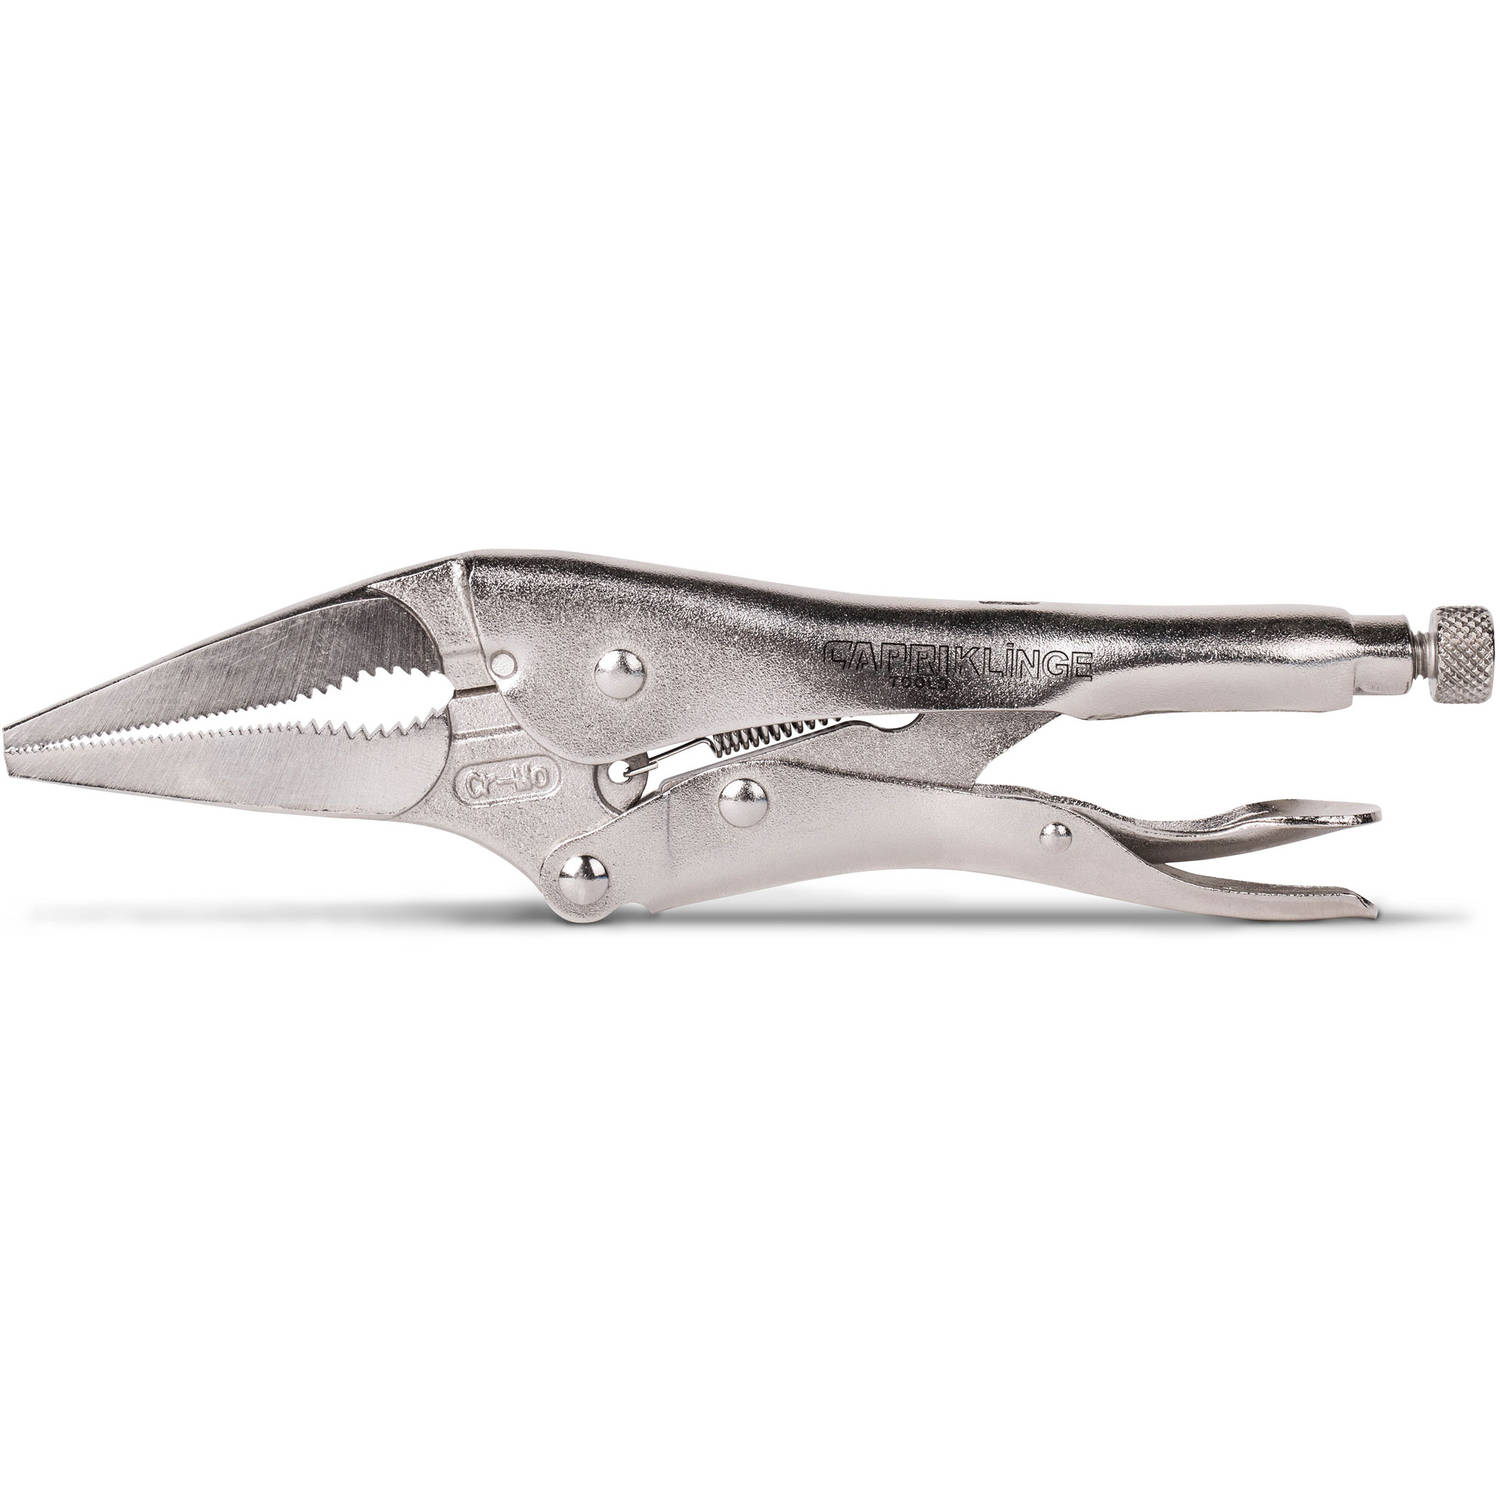 Capri Tools Klinge 9" Long Nose Locking Pliers with Wire Cutter - image 1 of 3